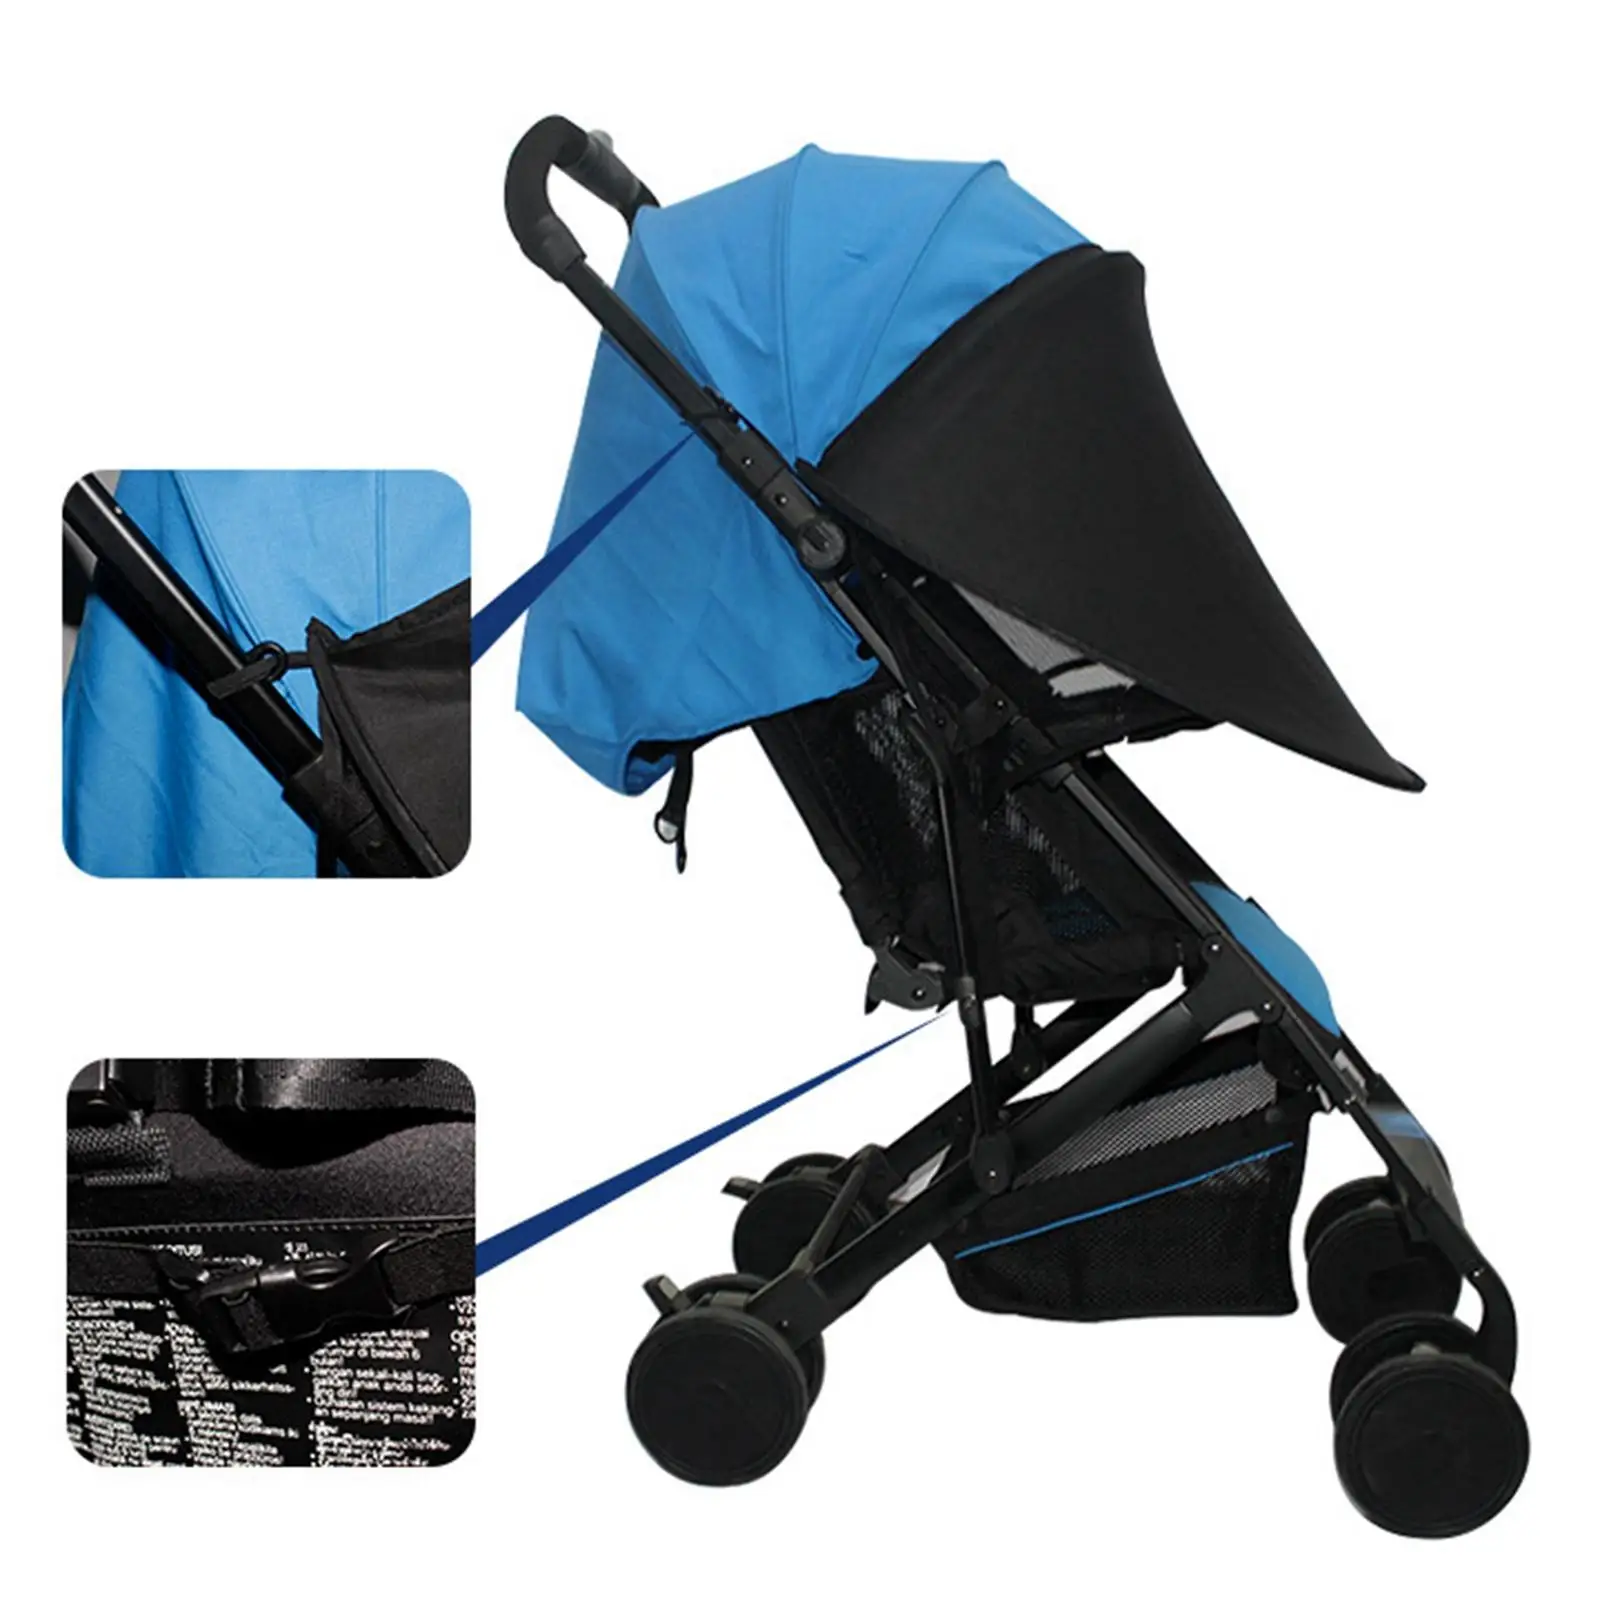 Baby Stroller Sunshade Windproof Nylon Fabric Adjustable for Outdoor Infant